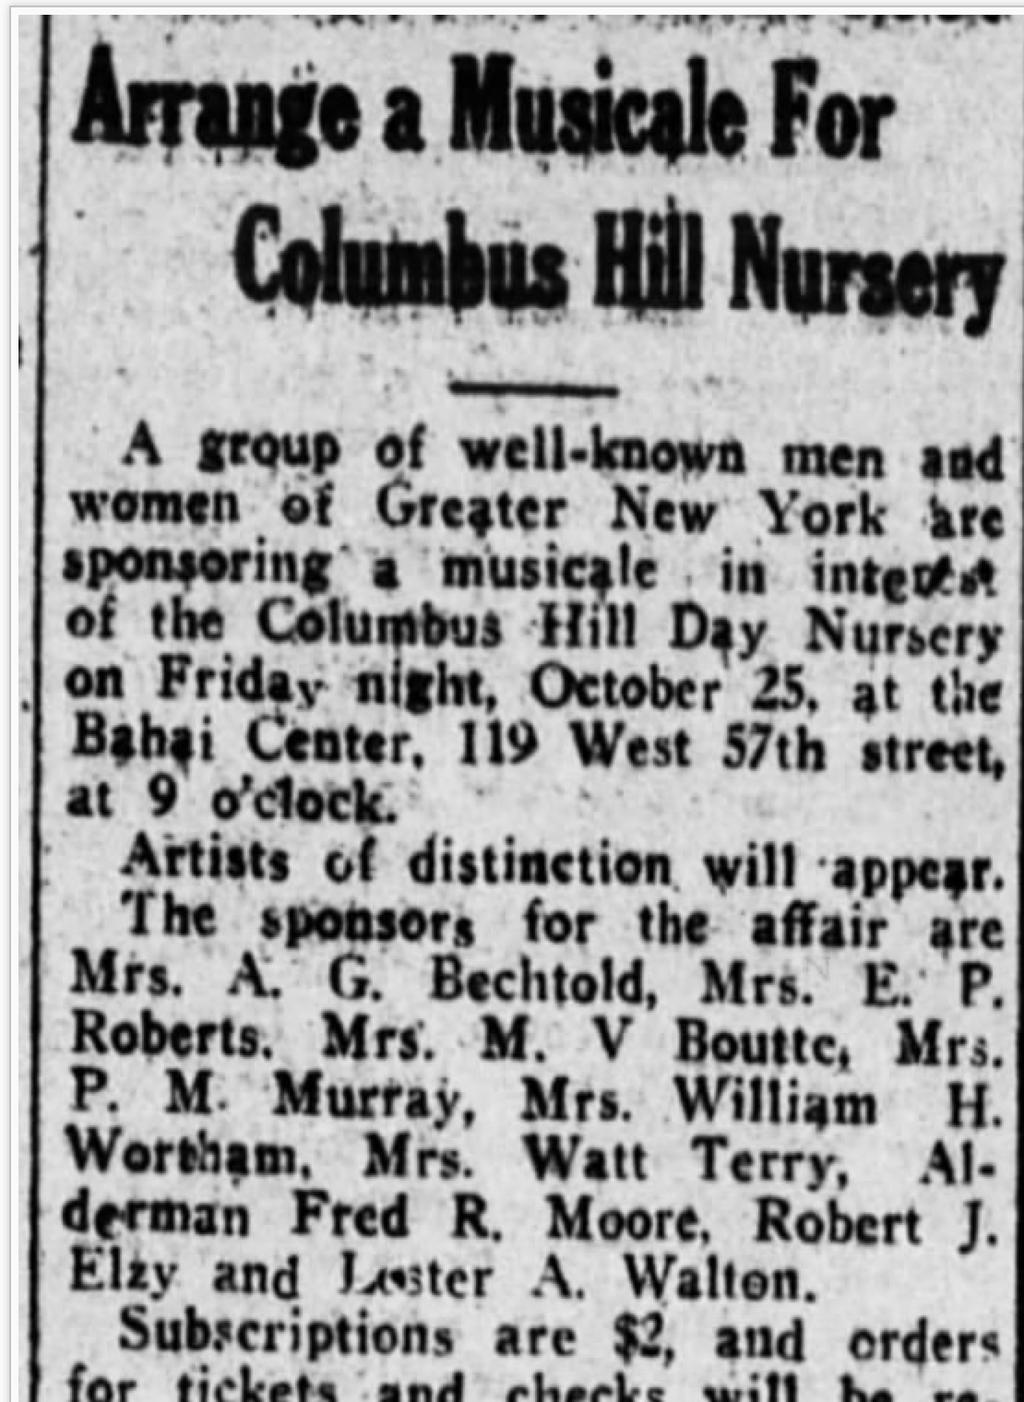 Ludmila, Mrs. George, Van Sombeek, in the process of getting married and moving to NC, was reported as a new member of the re-designated national inter-racial committee in September.